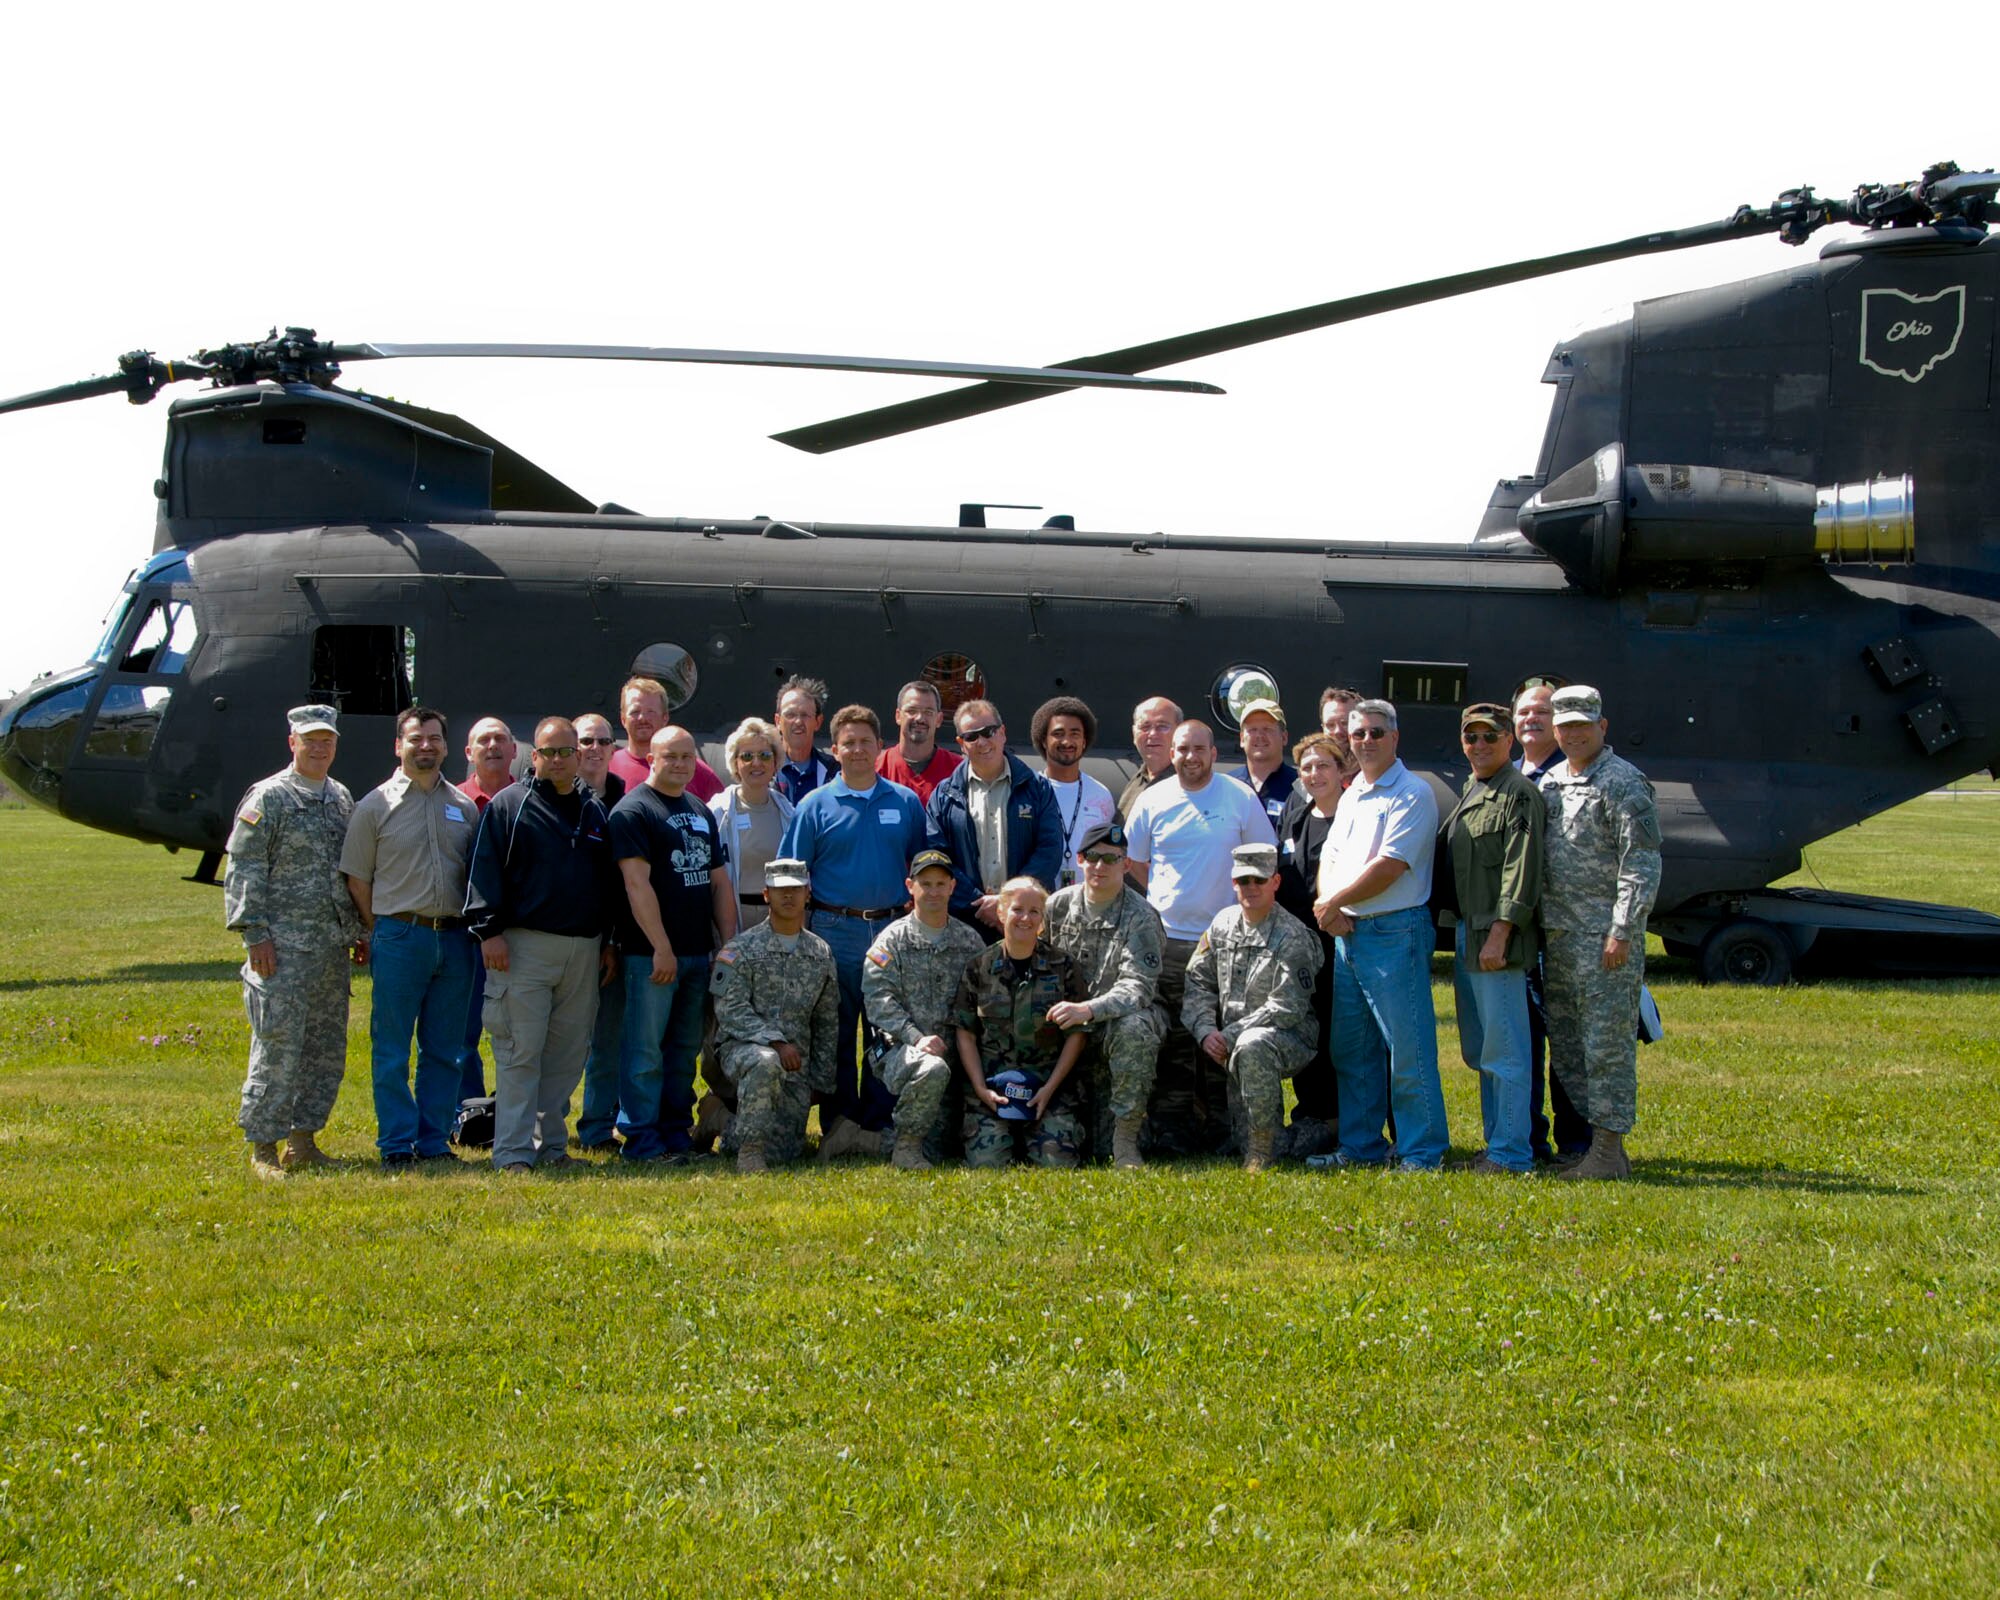 Employers of Ohio Air National Guard and Army National Guard servicemembers pose next to a Chinook helicopter during their visit to Camp Perry Joint Training Center before taking off to the 180th FW June 13, 2009 a joint employer event.